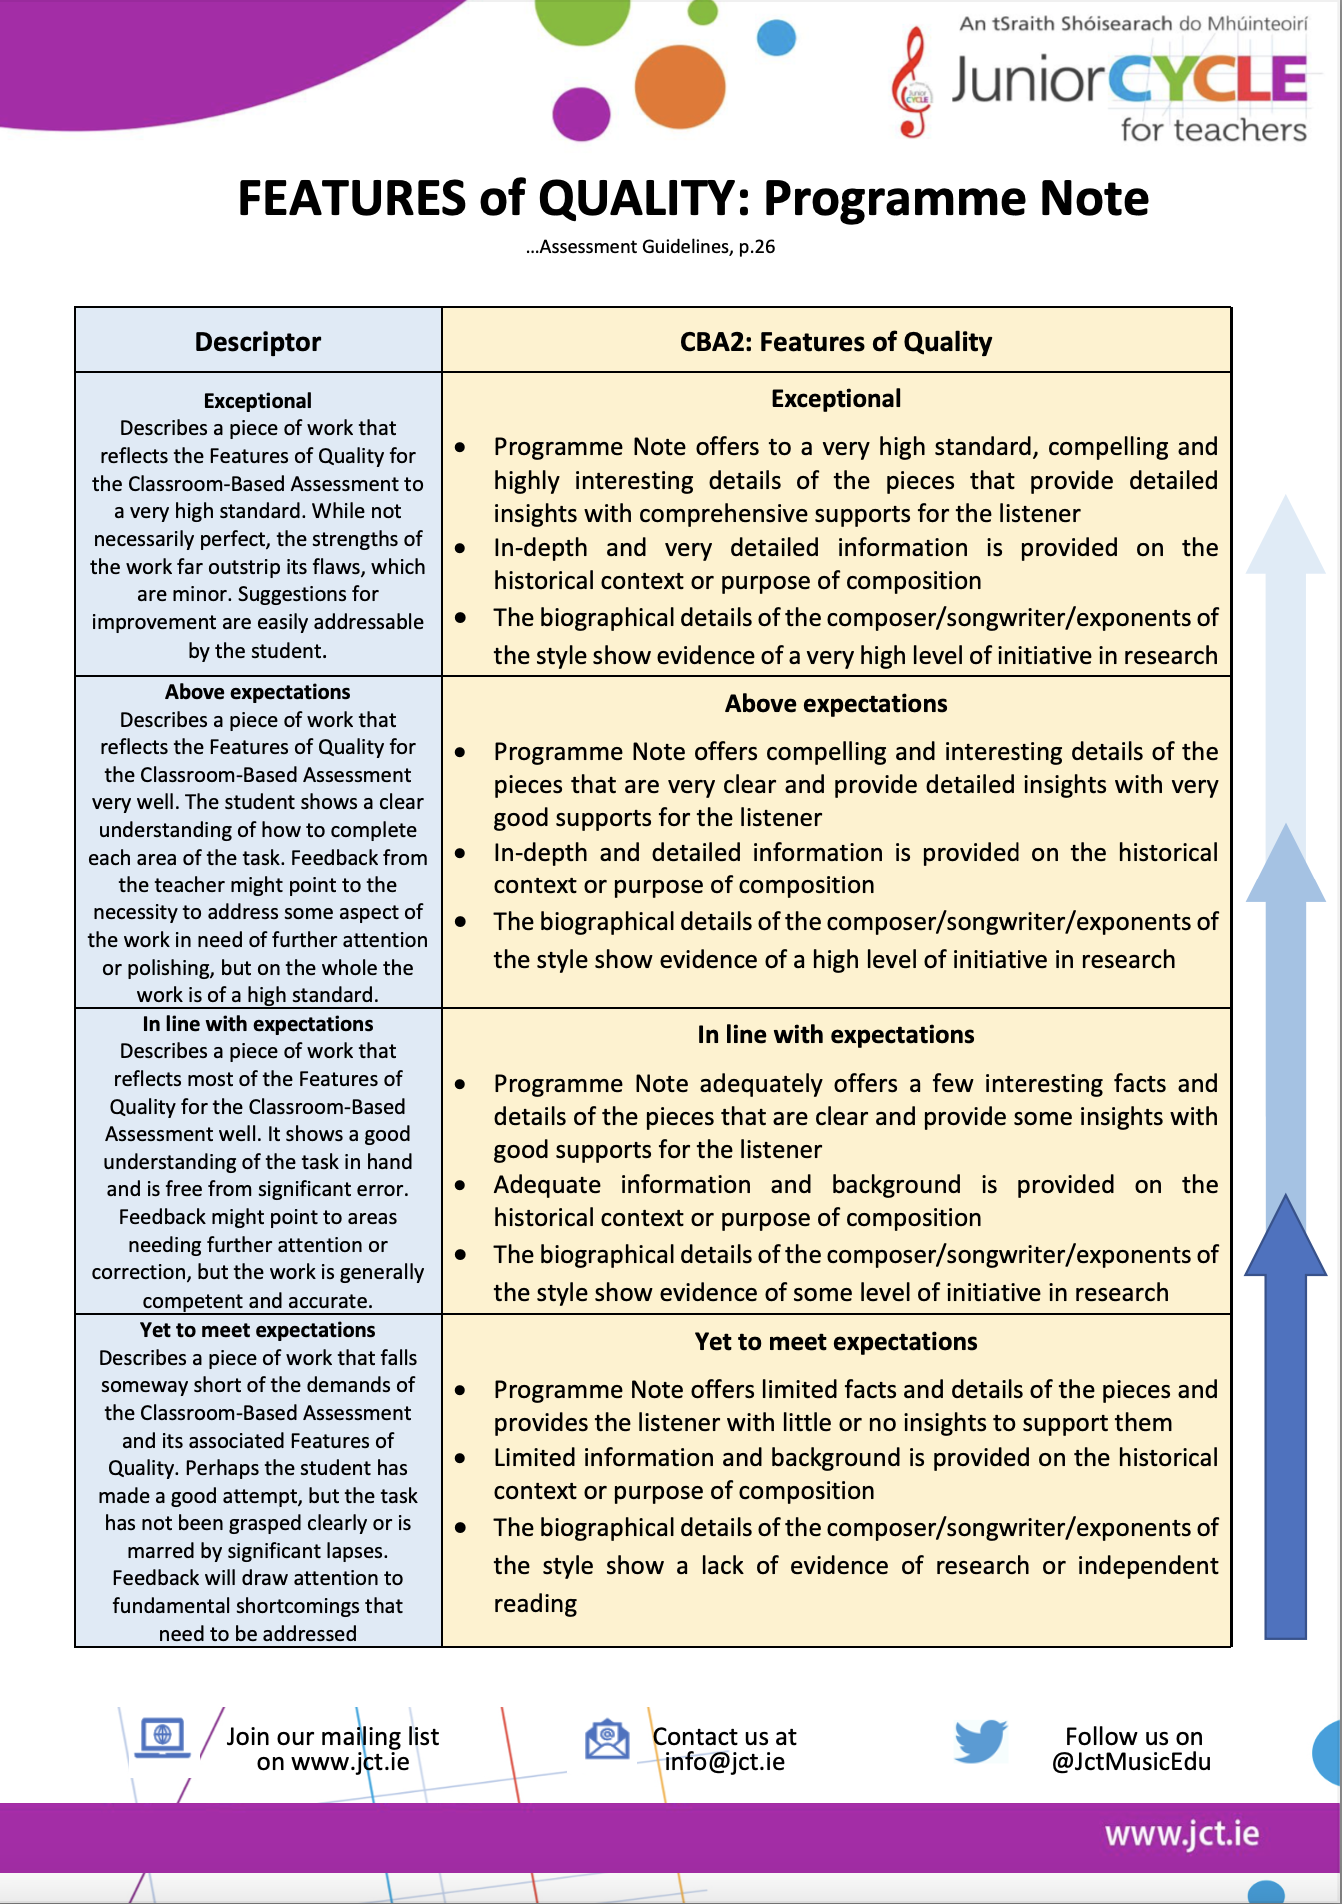 CBA2: Programme Note - Features of Quality